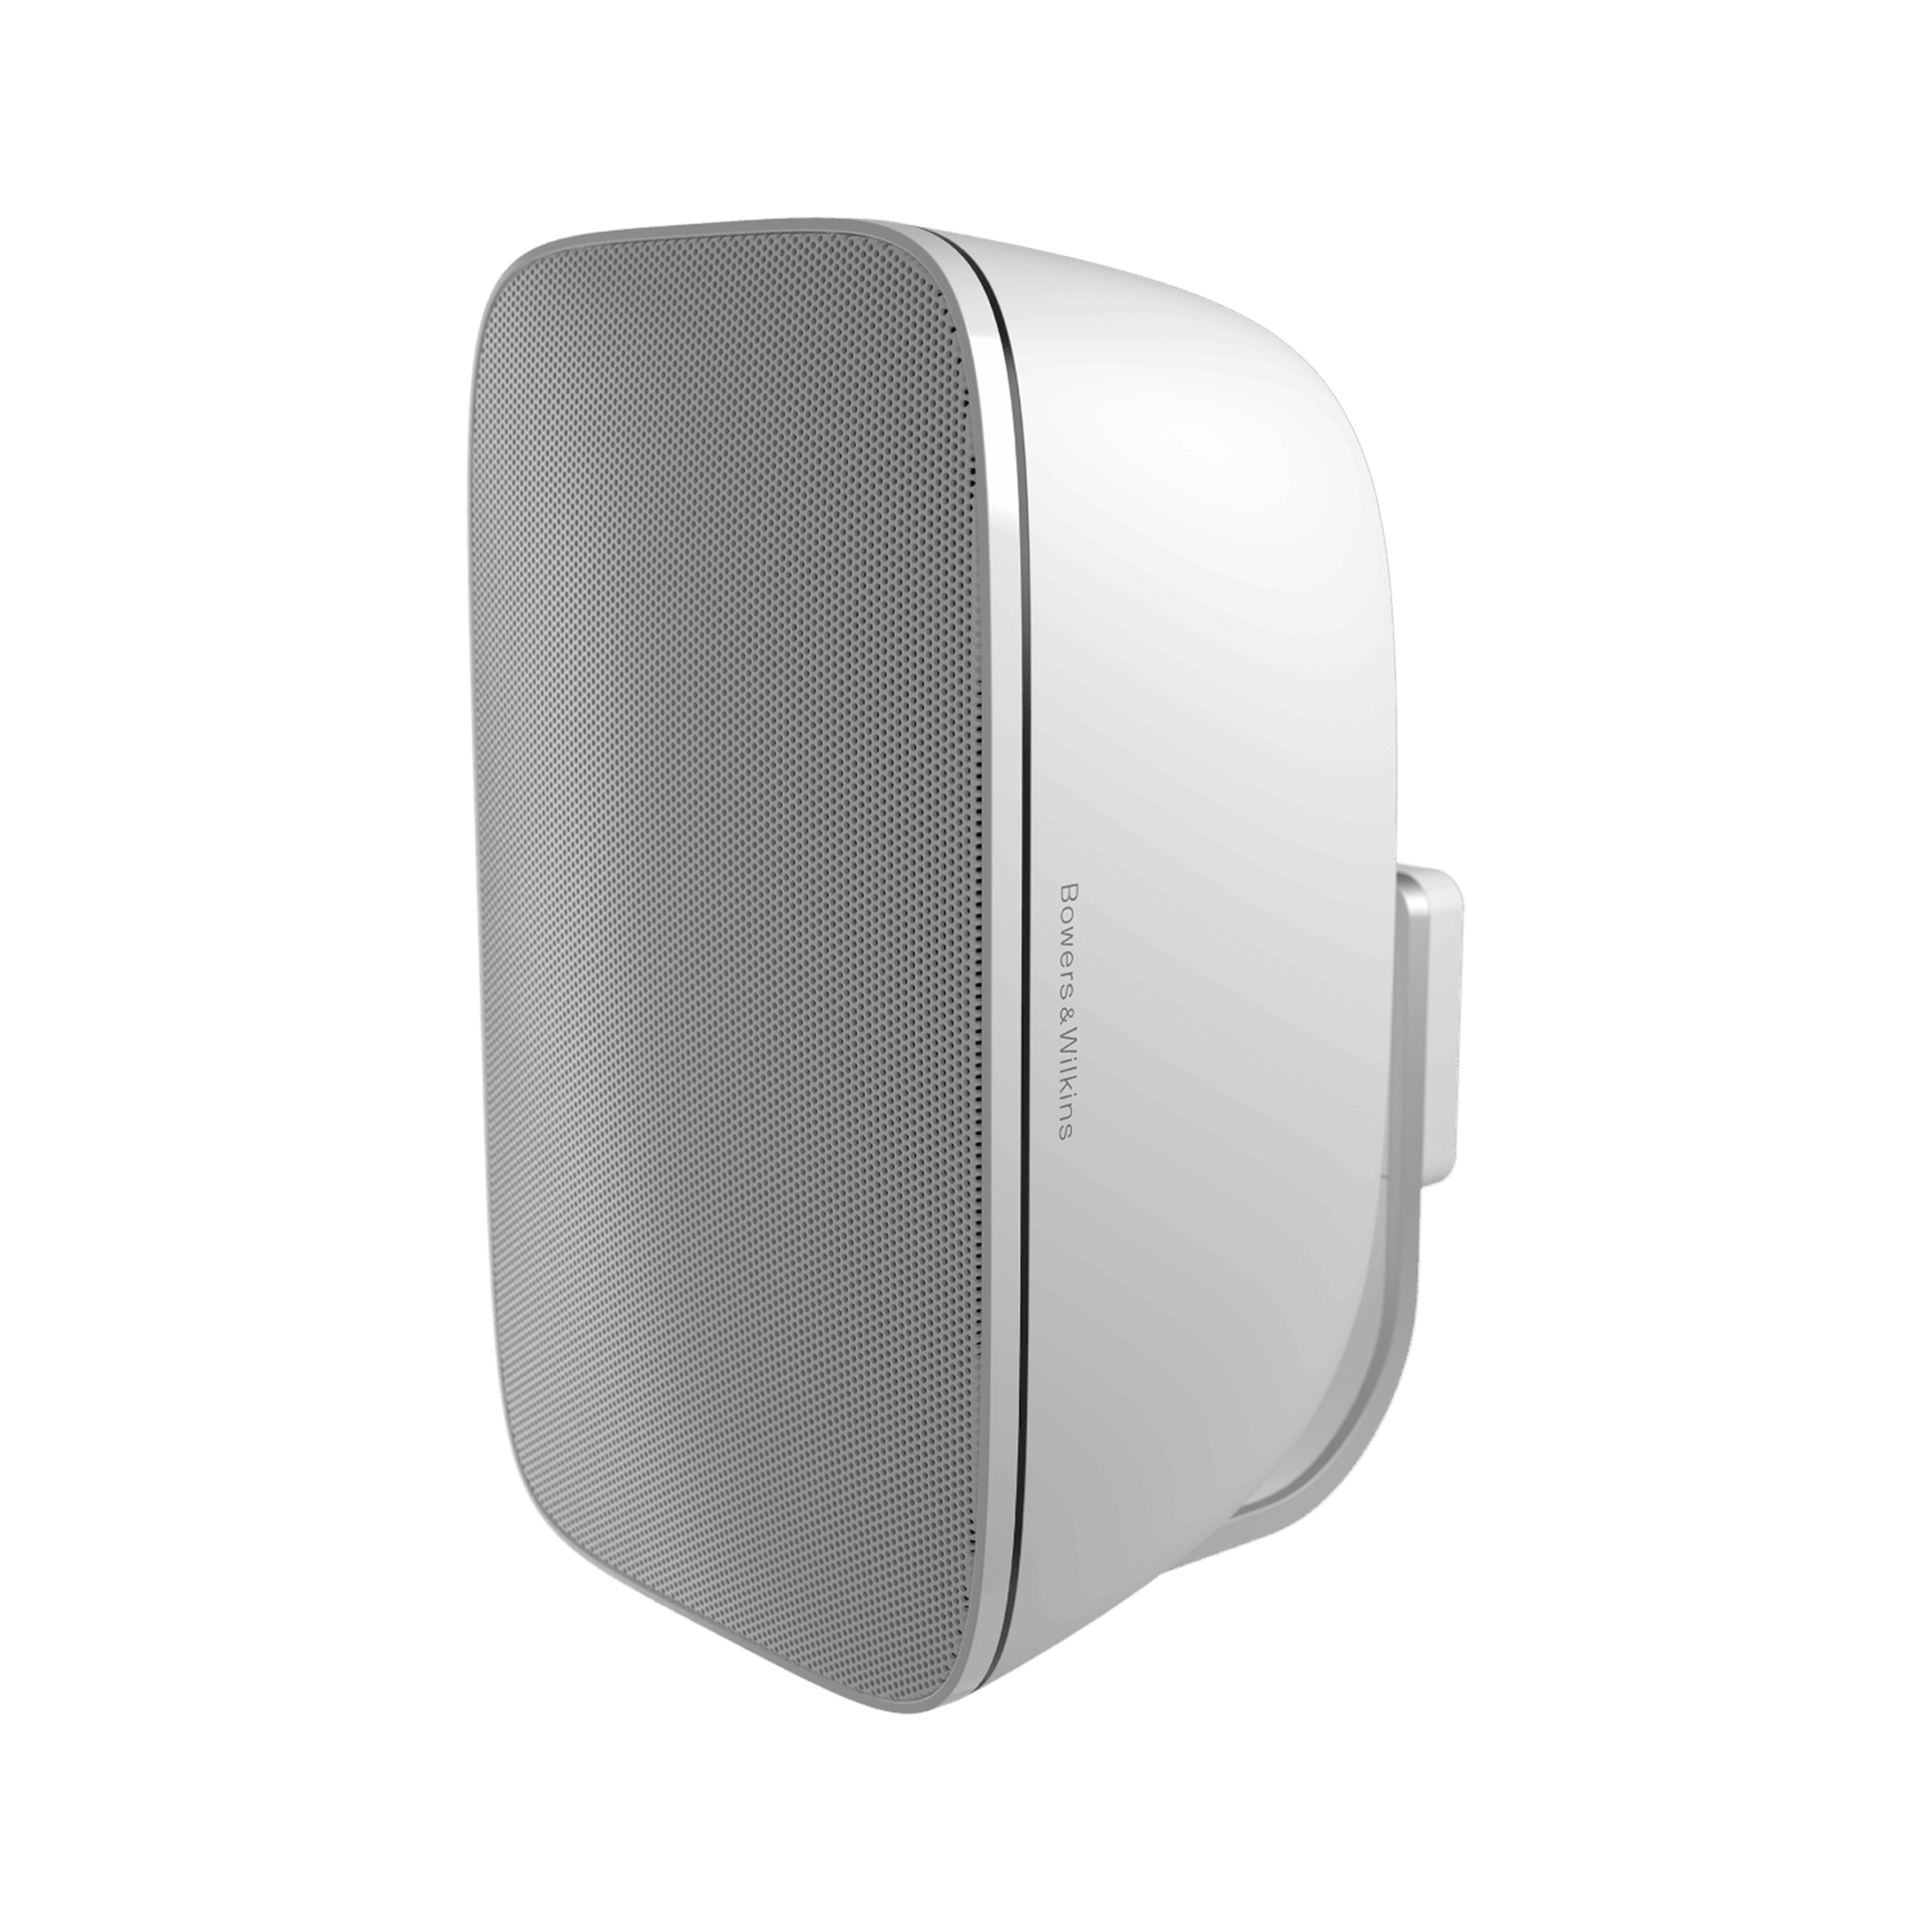 Bowers & Wilkins AM-1 - White - FP35130 - Pair